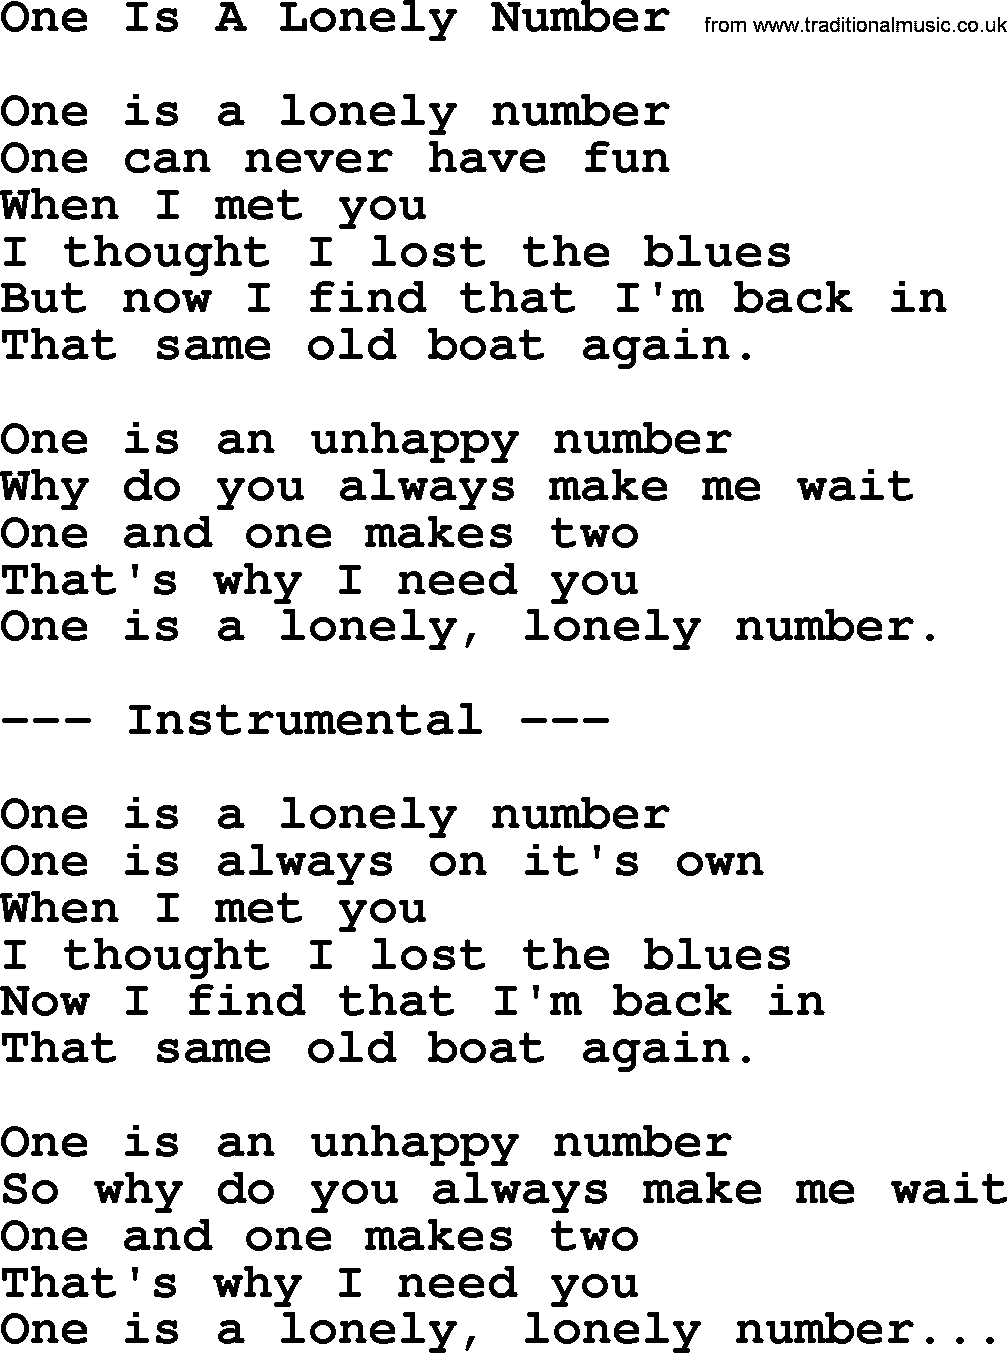 George Jones song: One Is A Lonely Number, lyrics